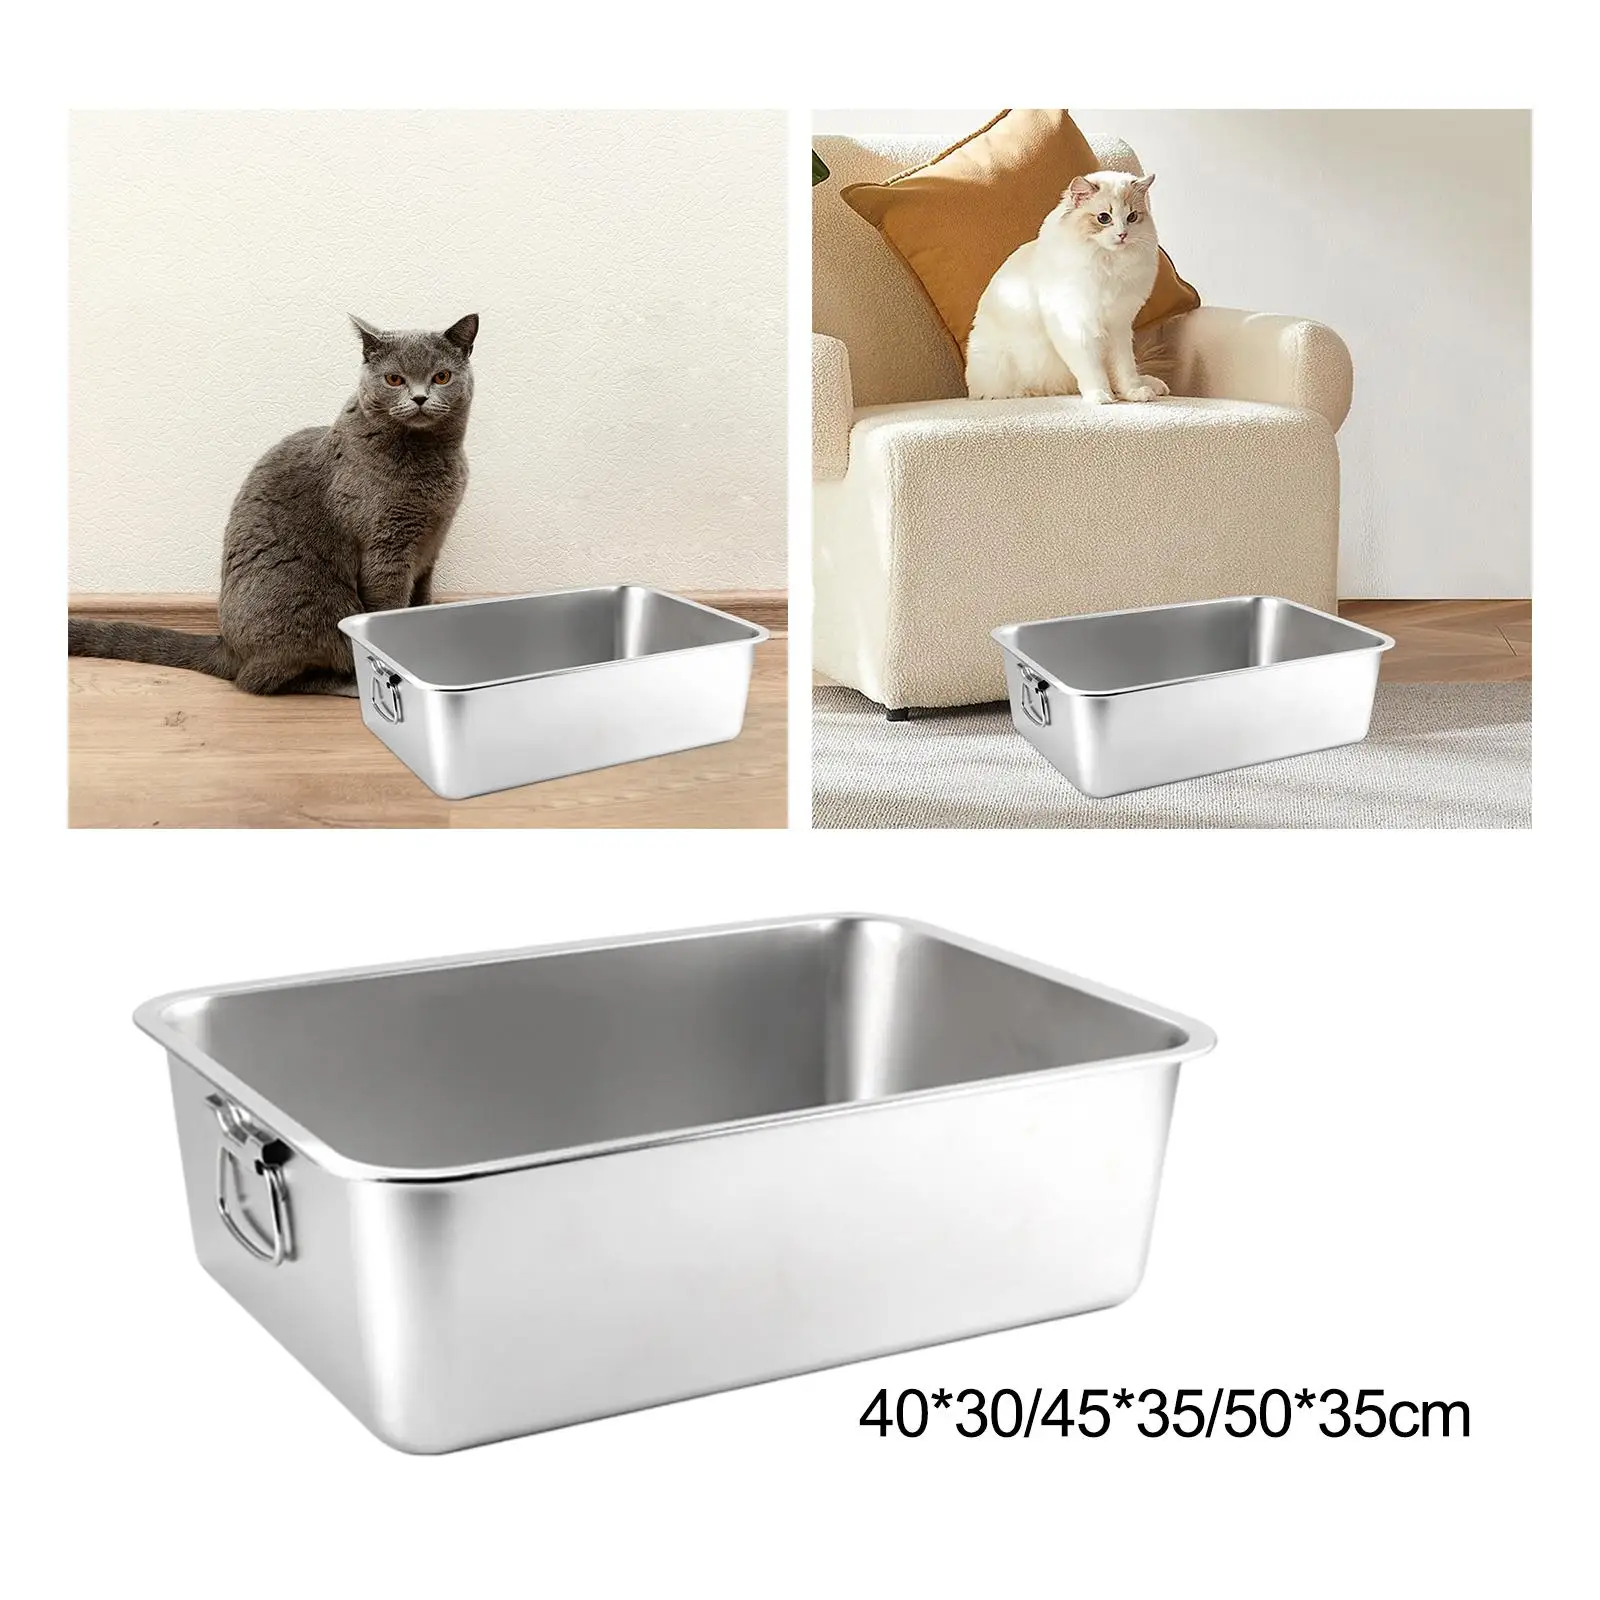 Open Cats for Indoor Cats, Cat Deep Toilet Stainless Steel Large Cat